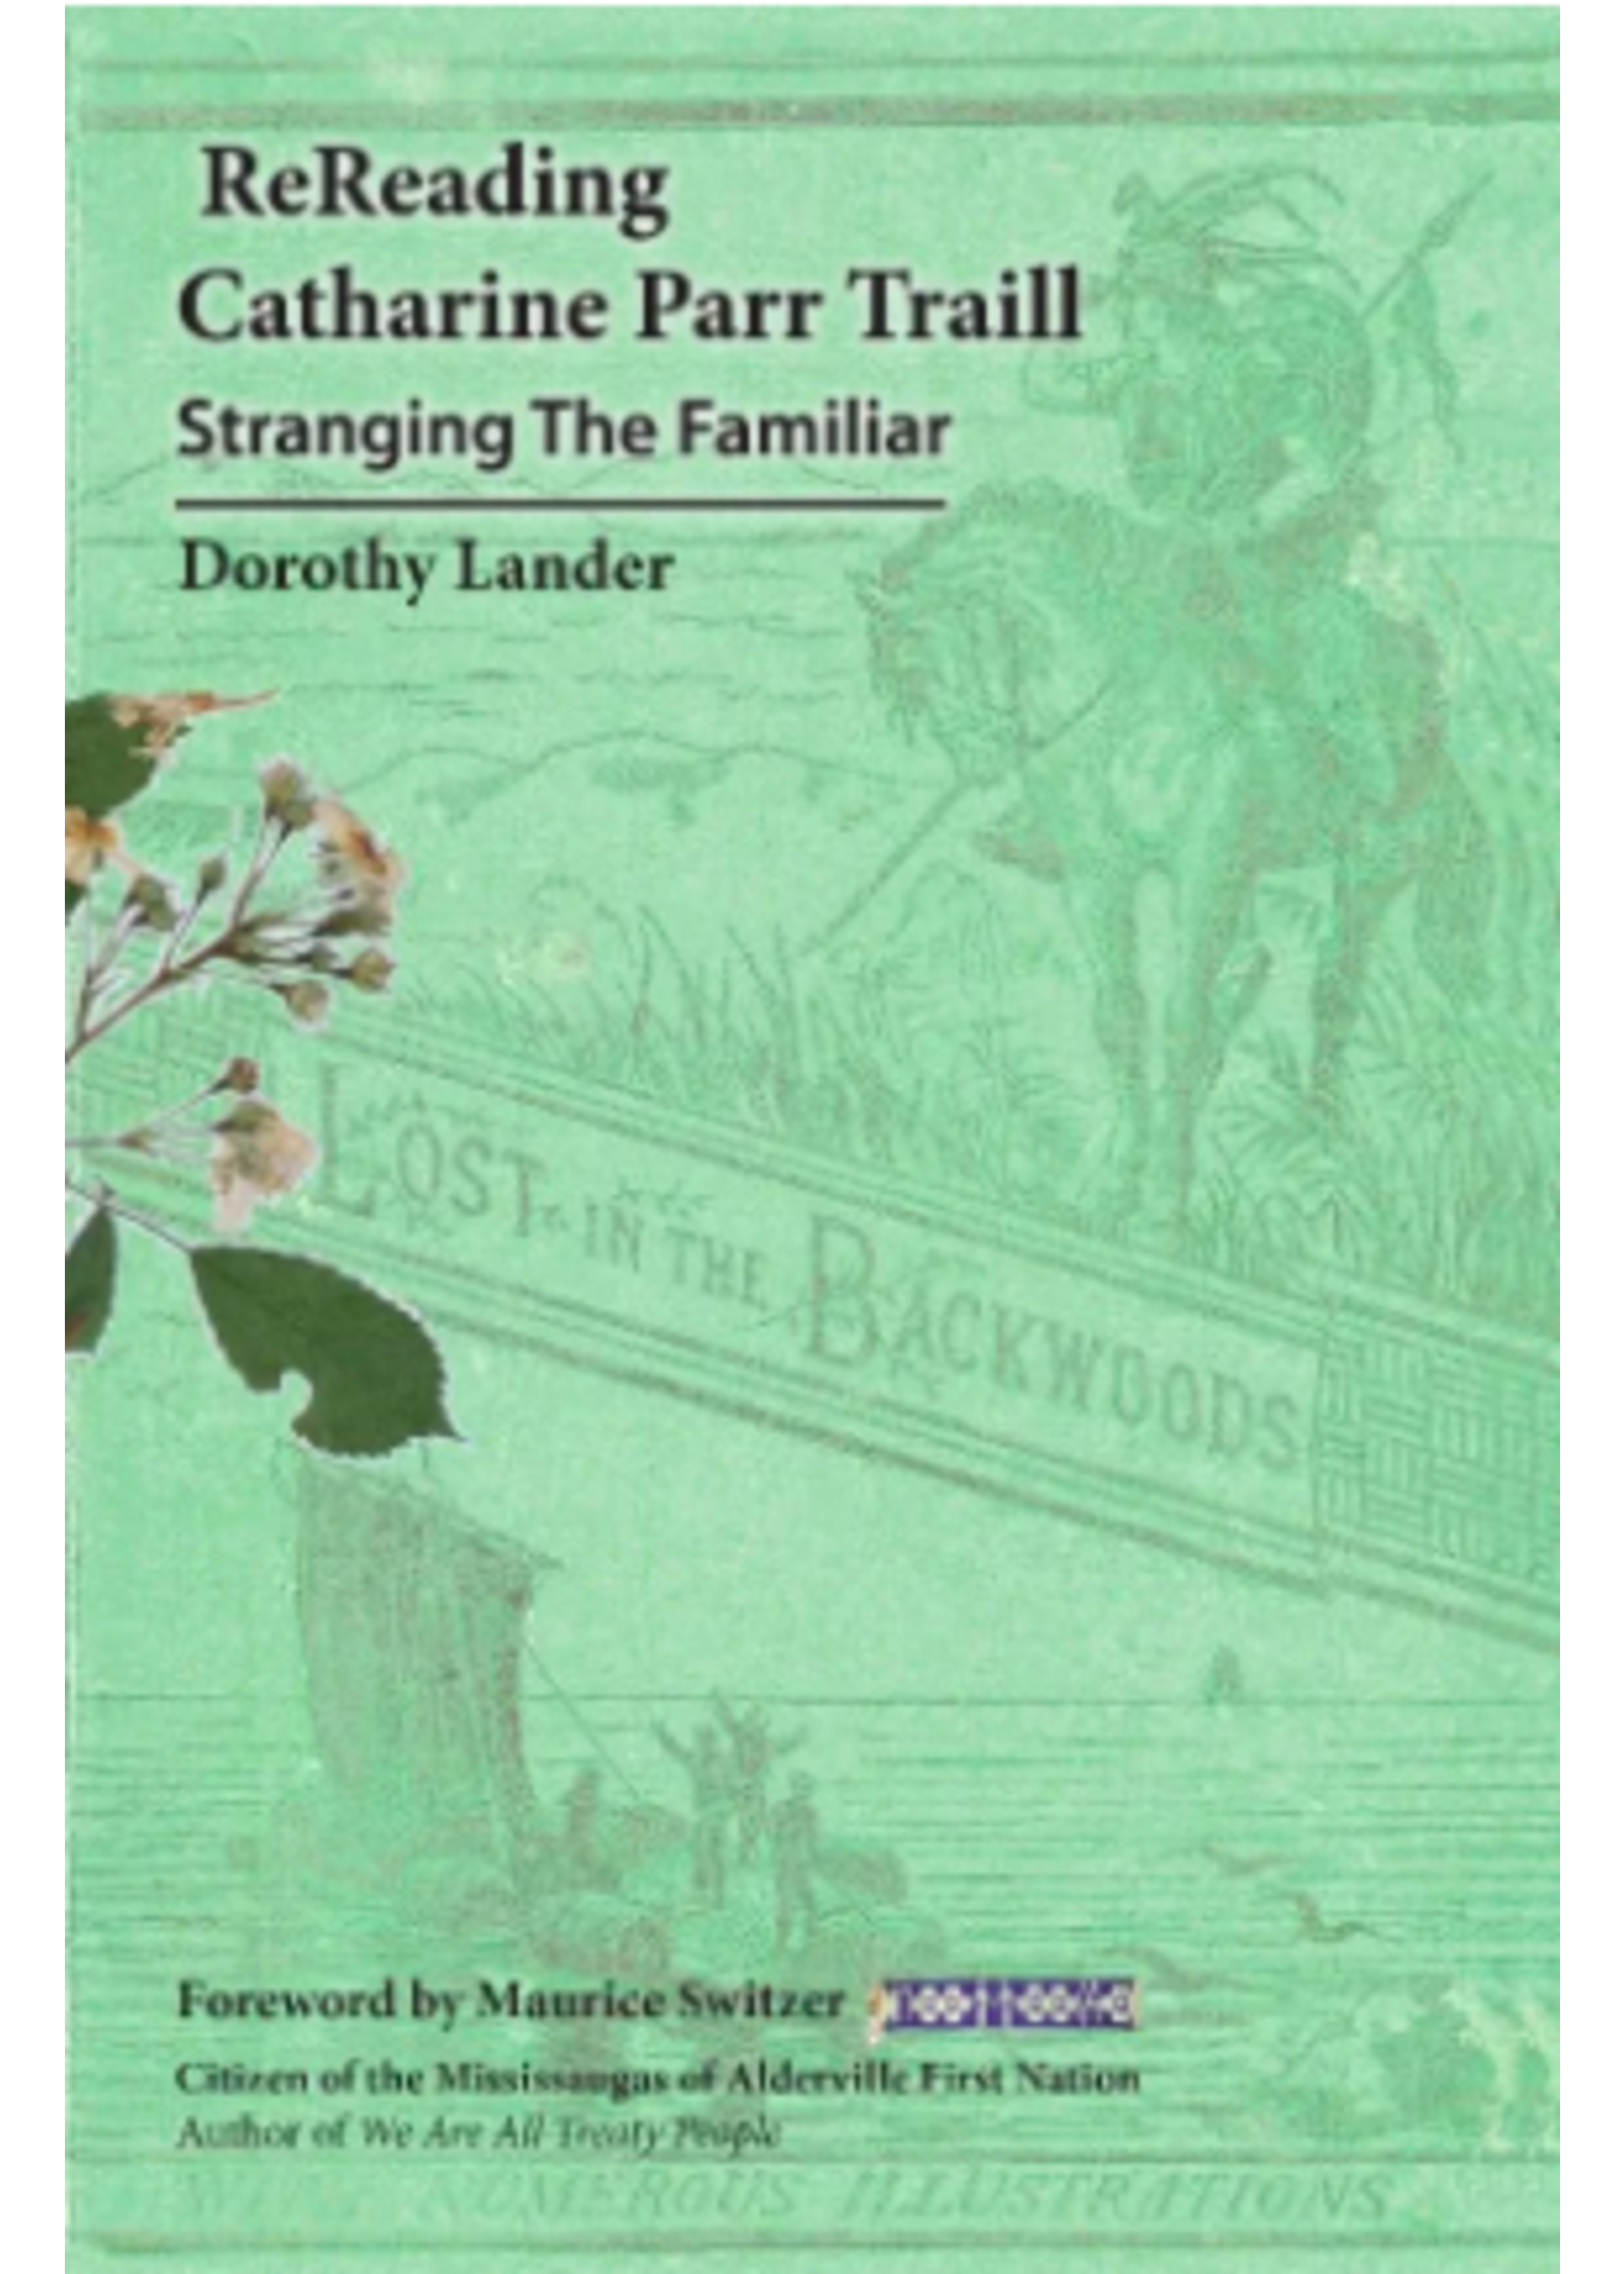 ReReading Catherine Parr Trail: Stranging the Familiar by Dorothy Lander